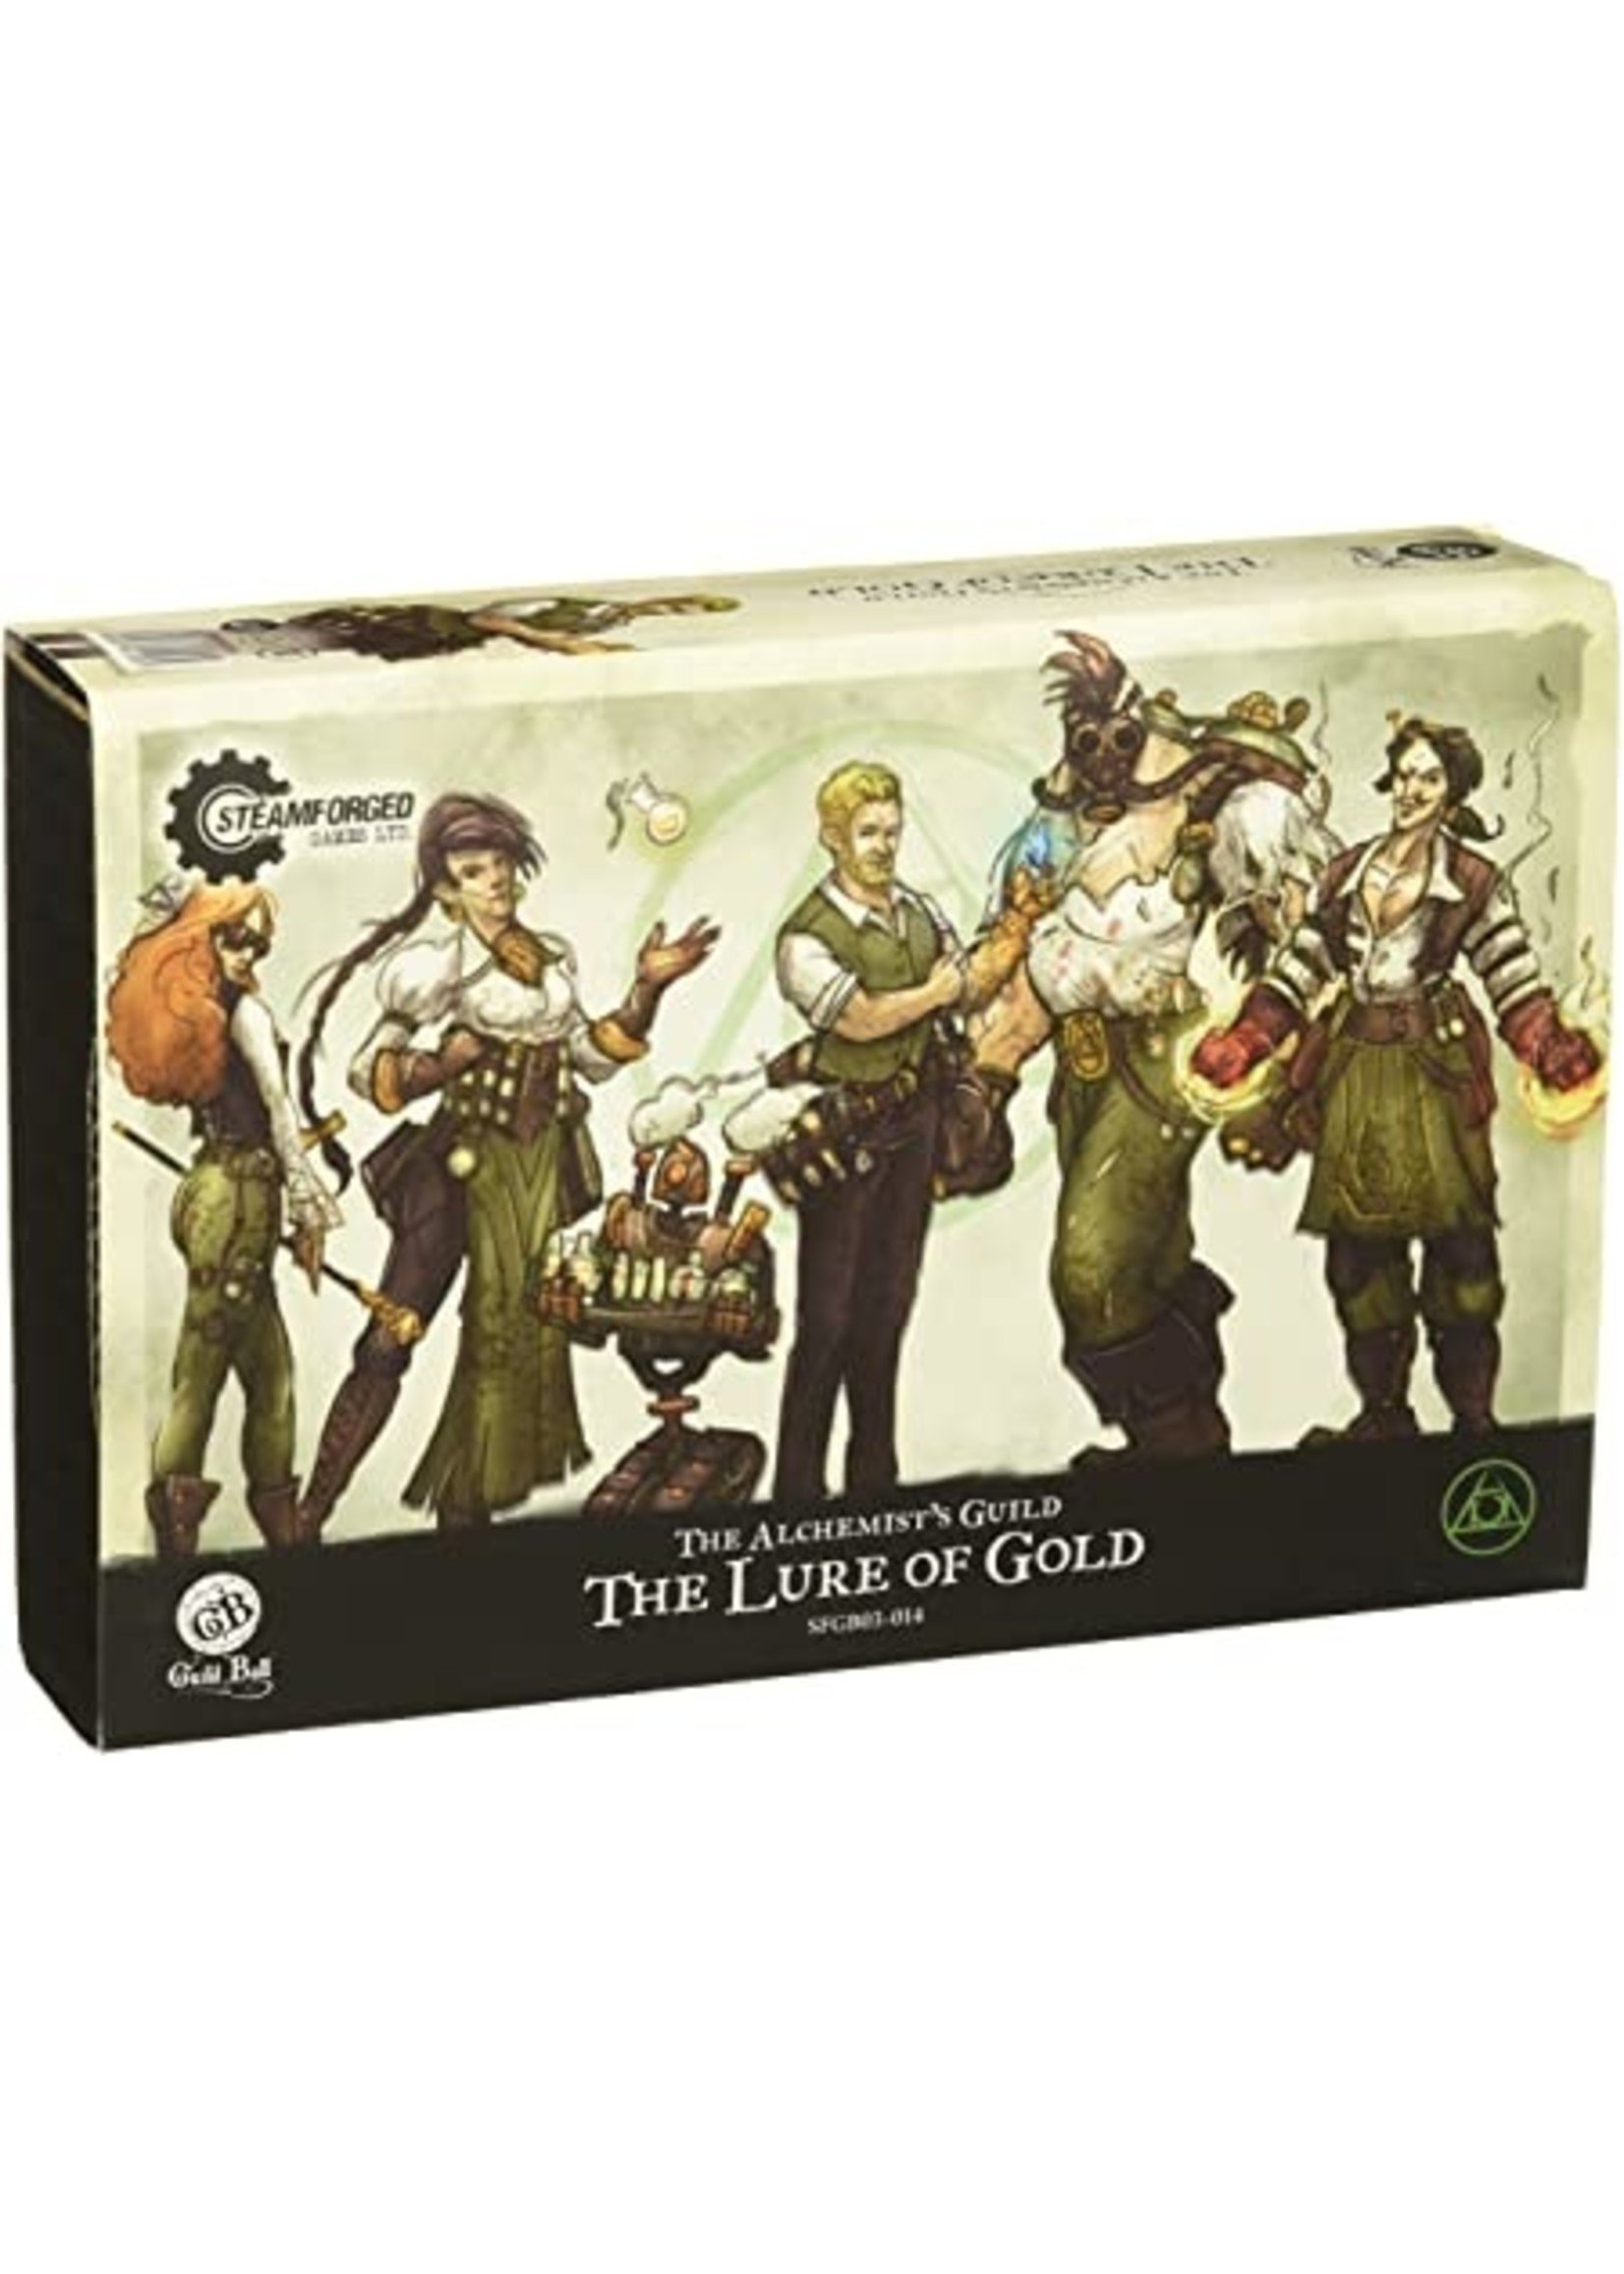 Steamforged Games Guild Ball The Lure of Gold